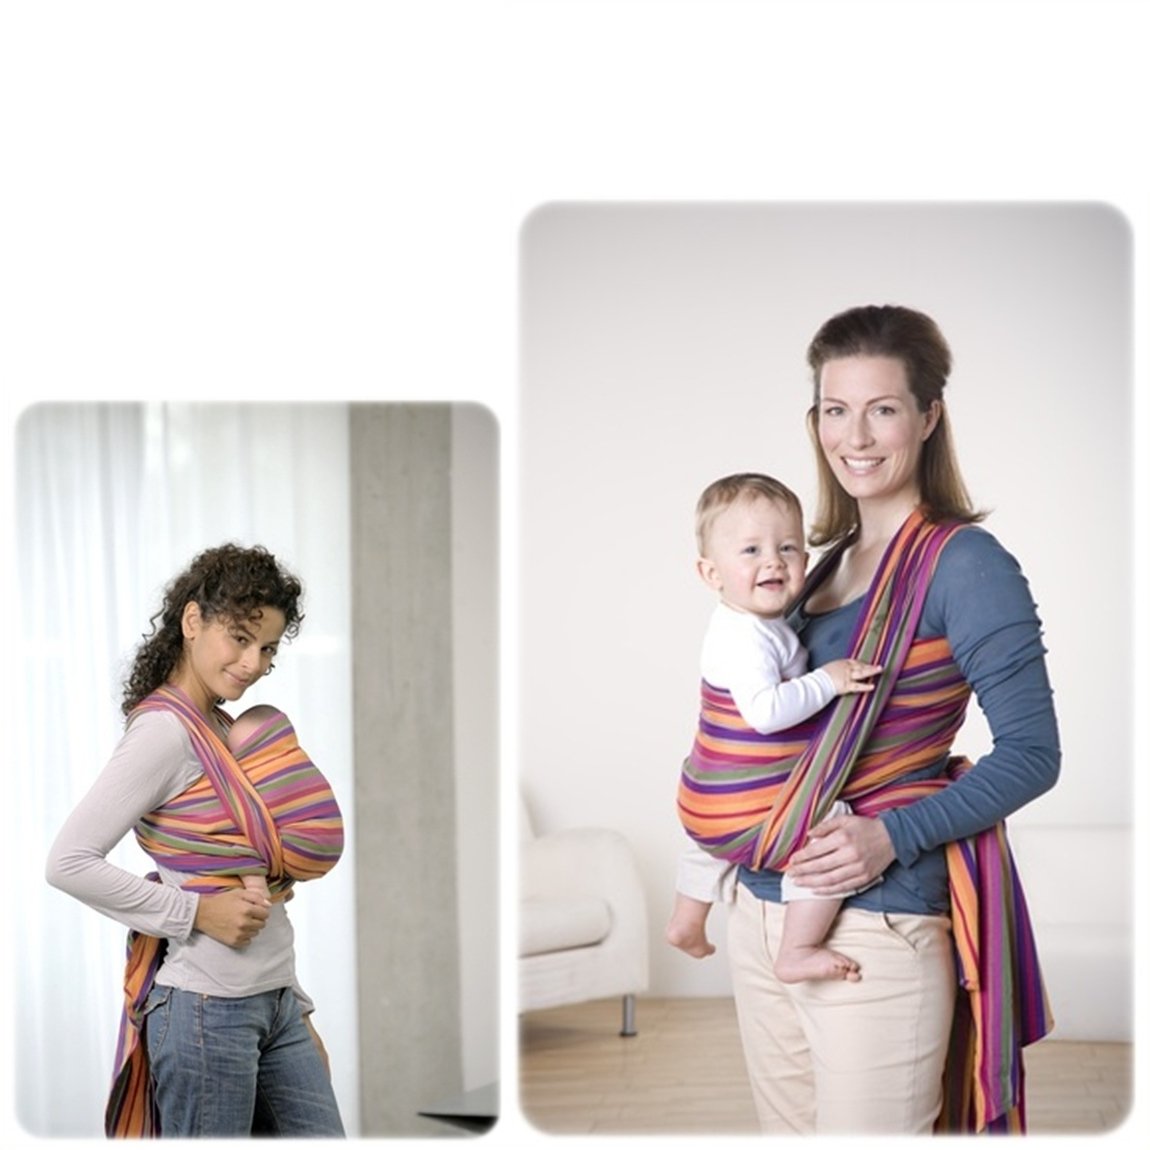 AMAZONAS Carry Sling Lollipop Baby Sling - Test Winner at Stiftung Warentest with Top Mark 1.7-510 cm 0-3 Years up to 15 kg in Colourful Stripes